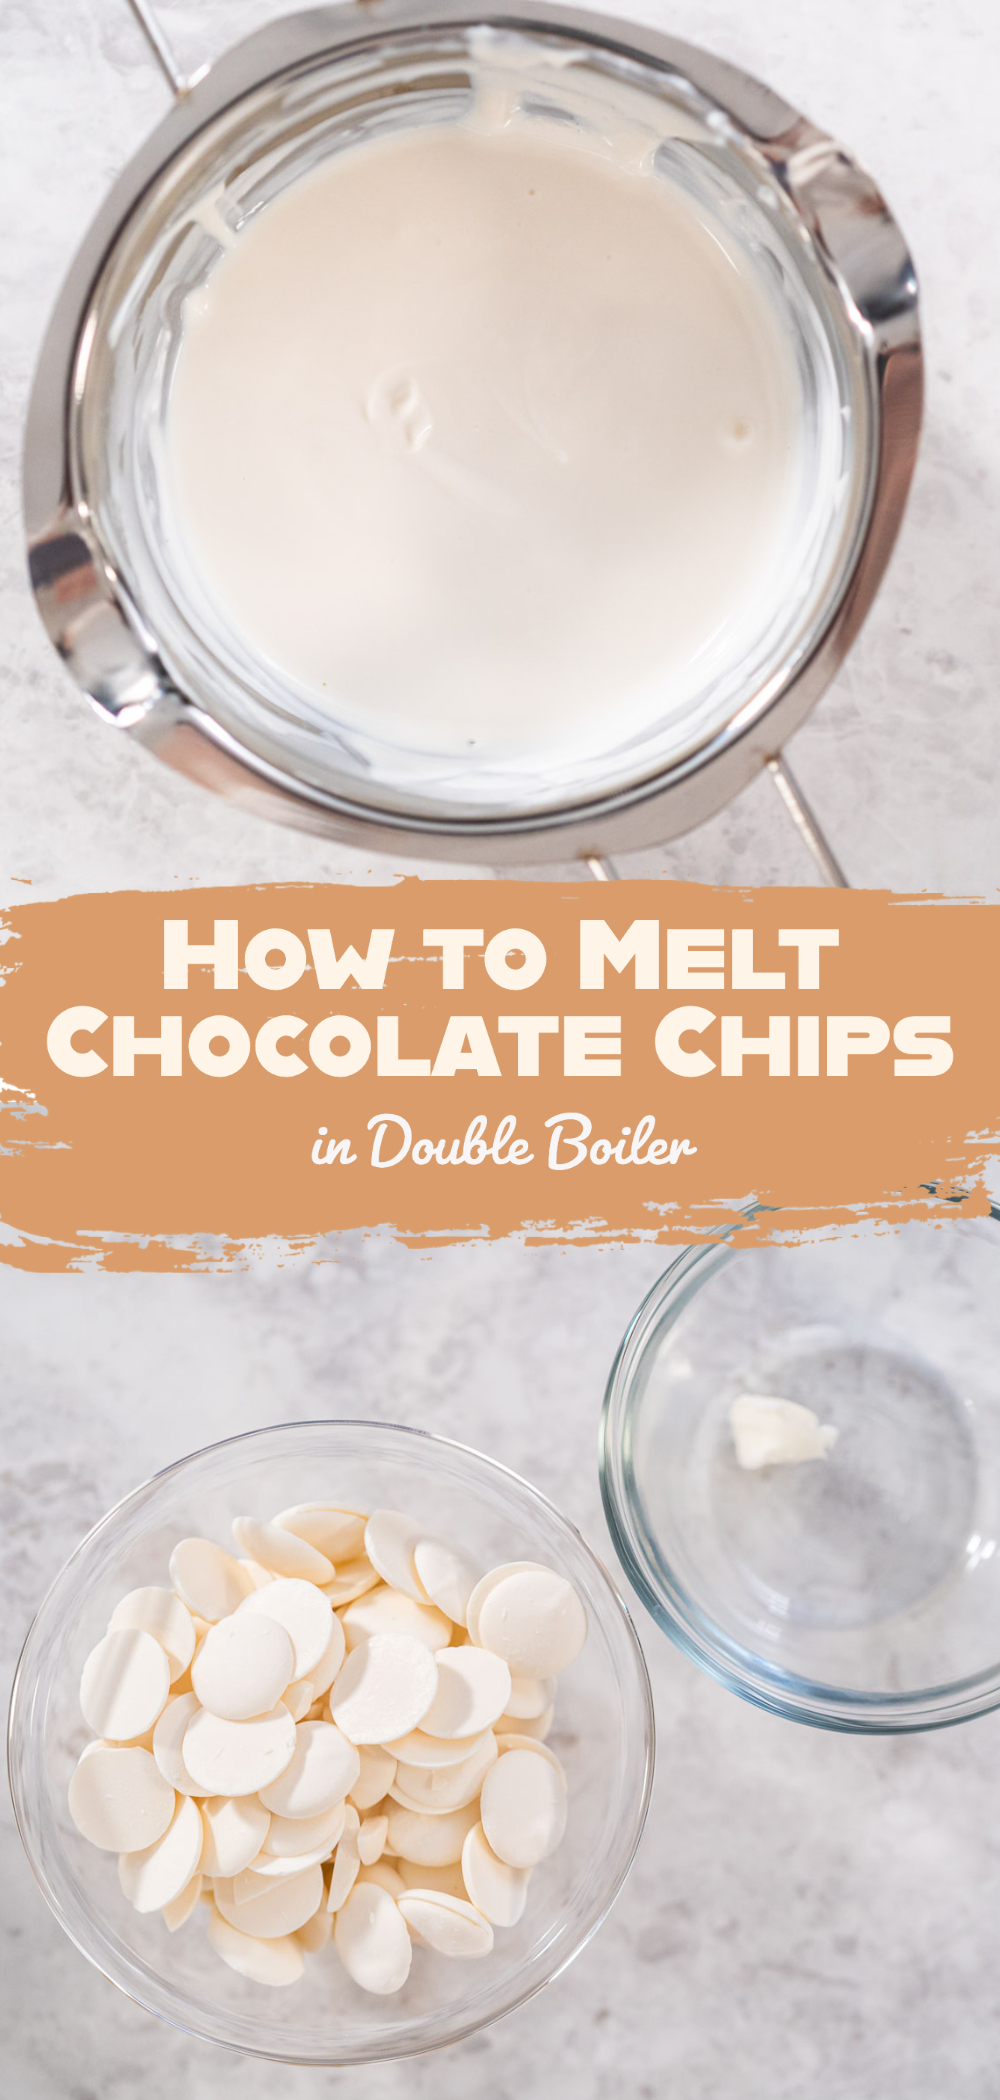 How to Melt Chocolate Chips in Double Boiler